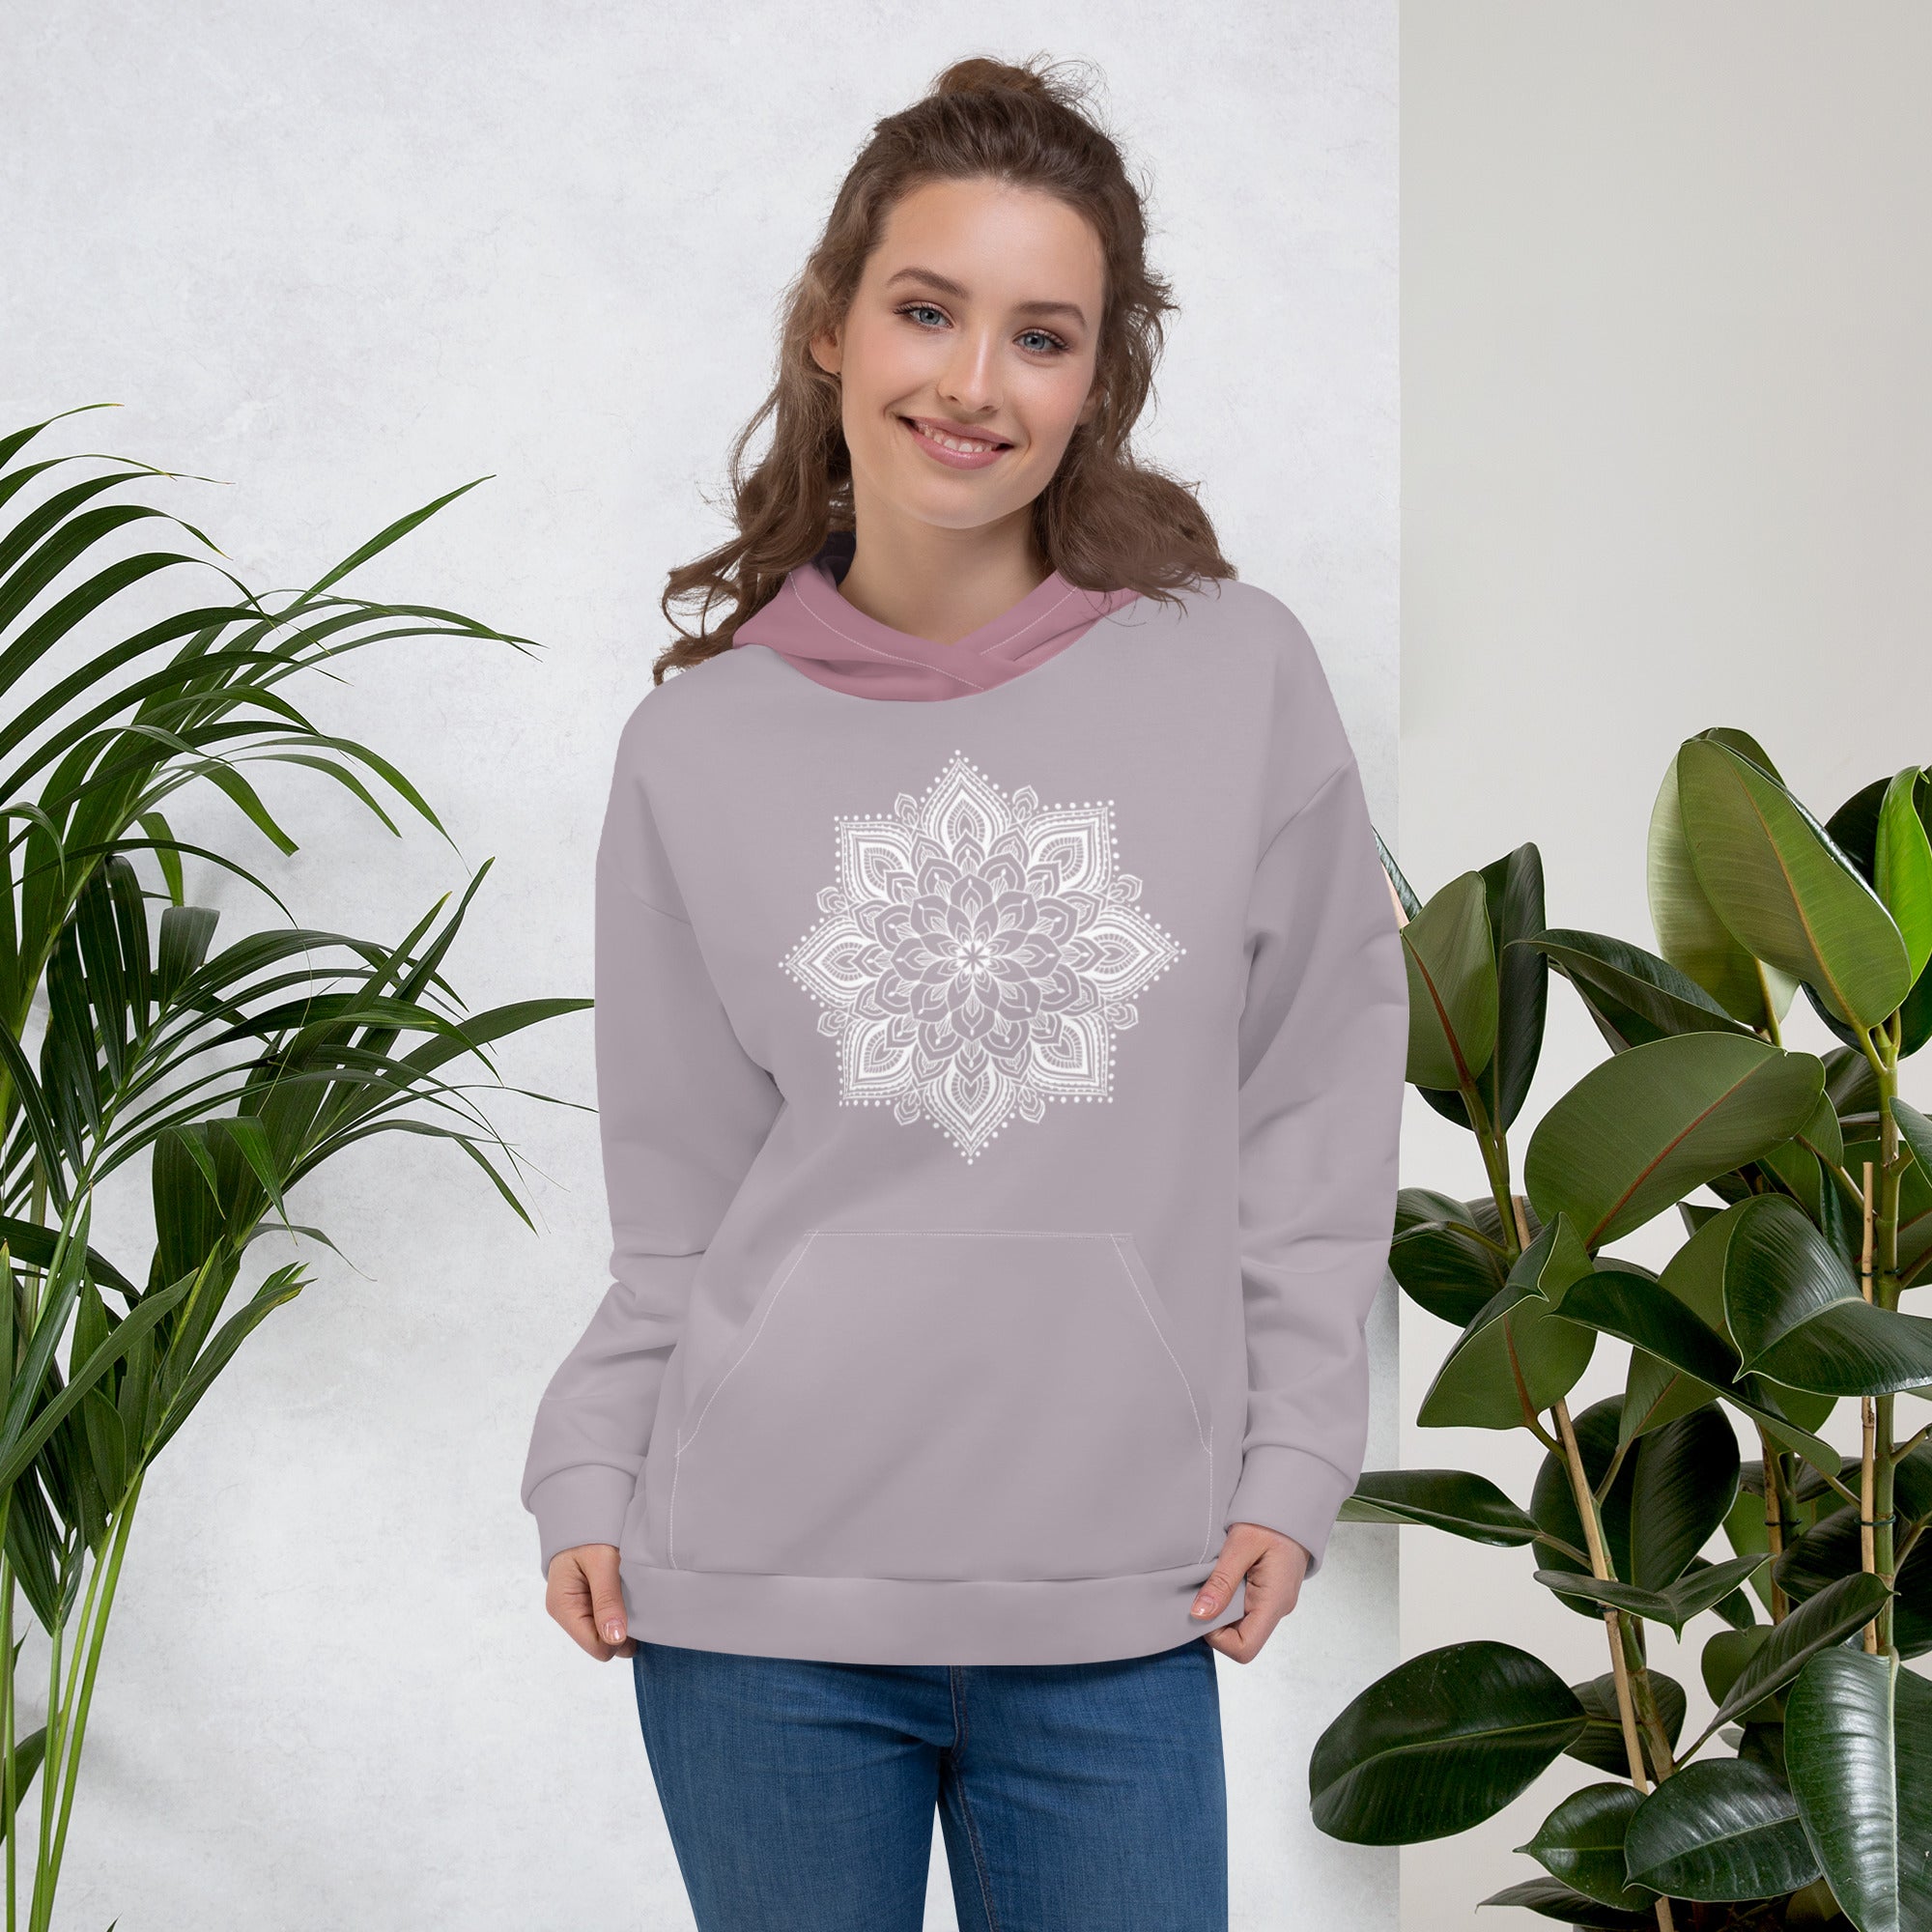 mystic 77 heart chakra mandala hoodie by goddess swag.  design on front is a white mandala.  design on back is a white heart chakra mandala enlarged. The hood is a medium mauve. The background of the hoodie is a solid light mauve.  Hoodie has a pocket pouch in front.